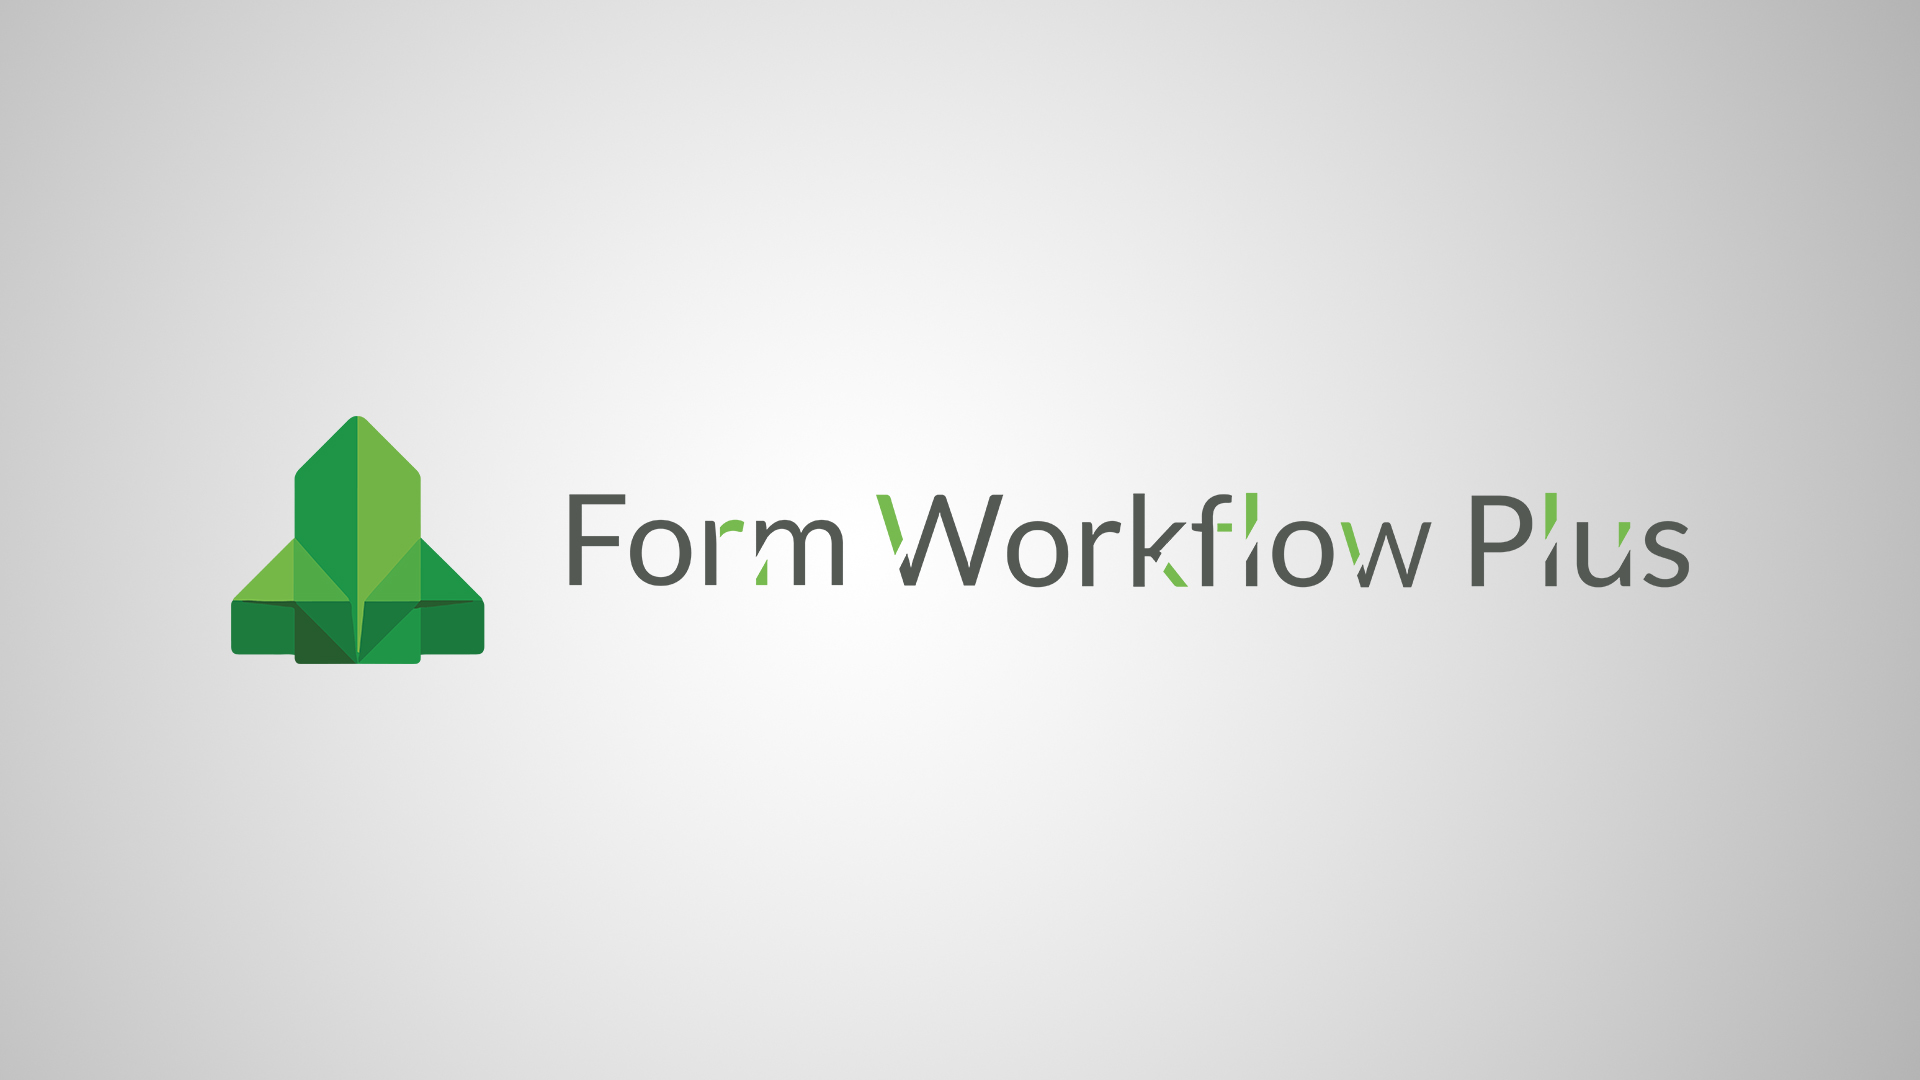 Form Workflow Plus is Getting a New Look